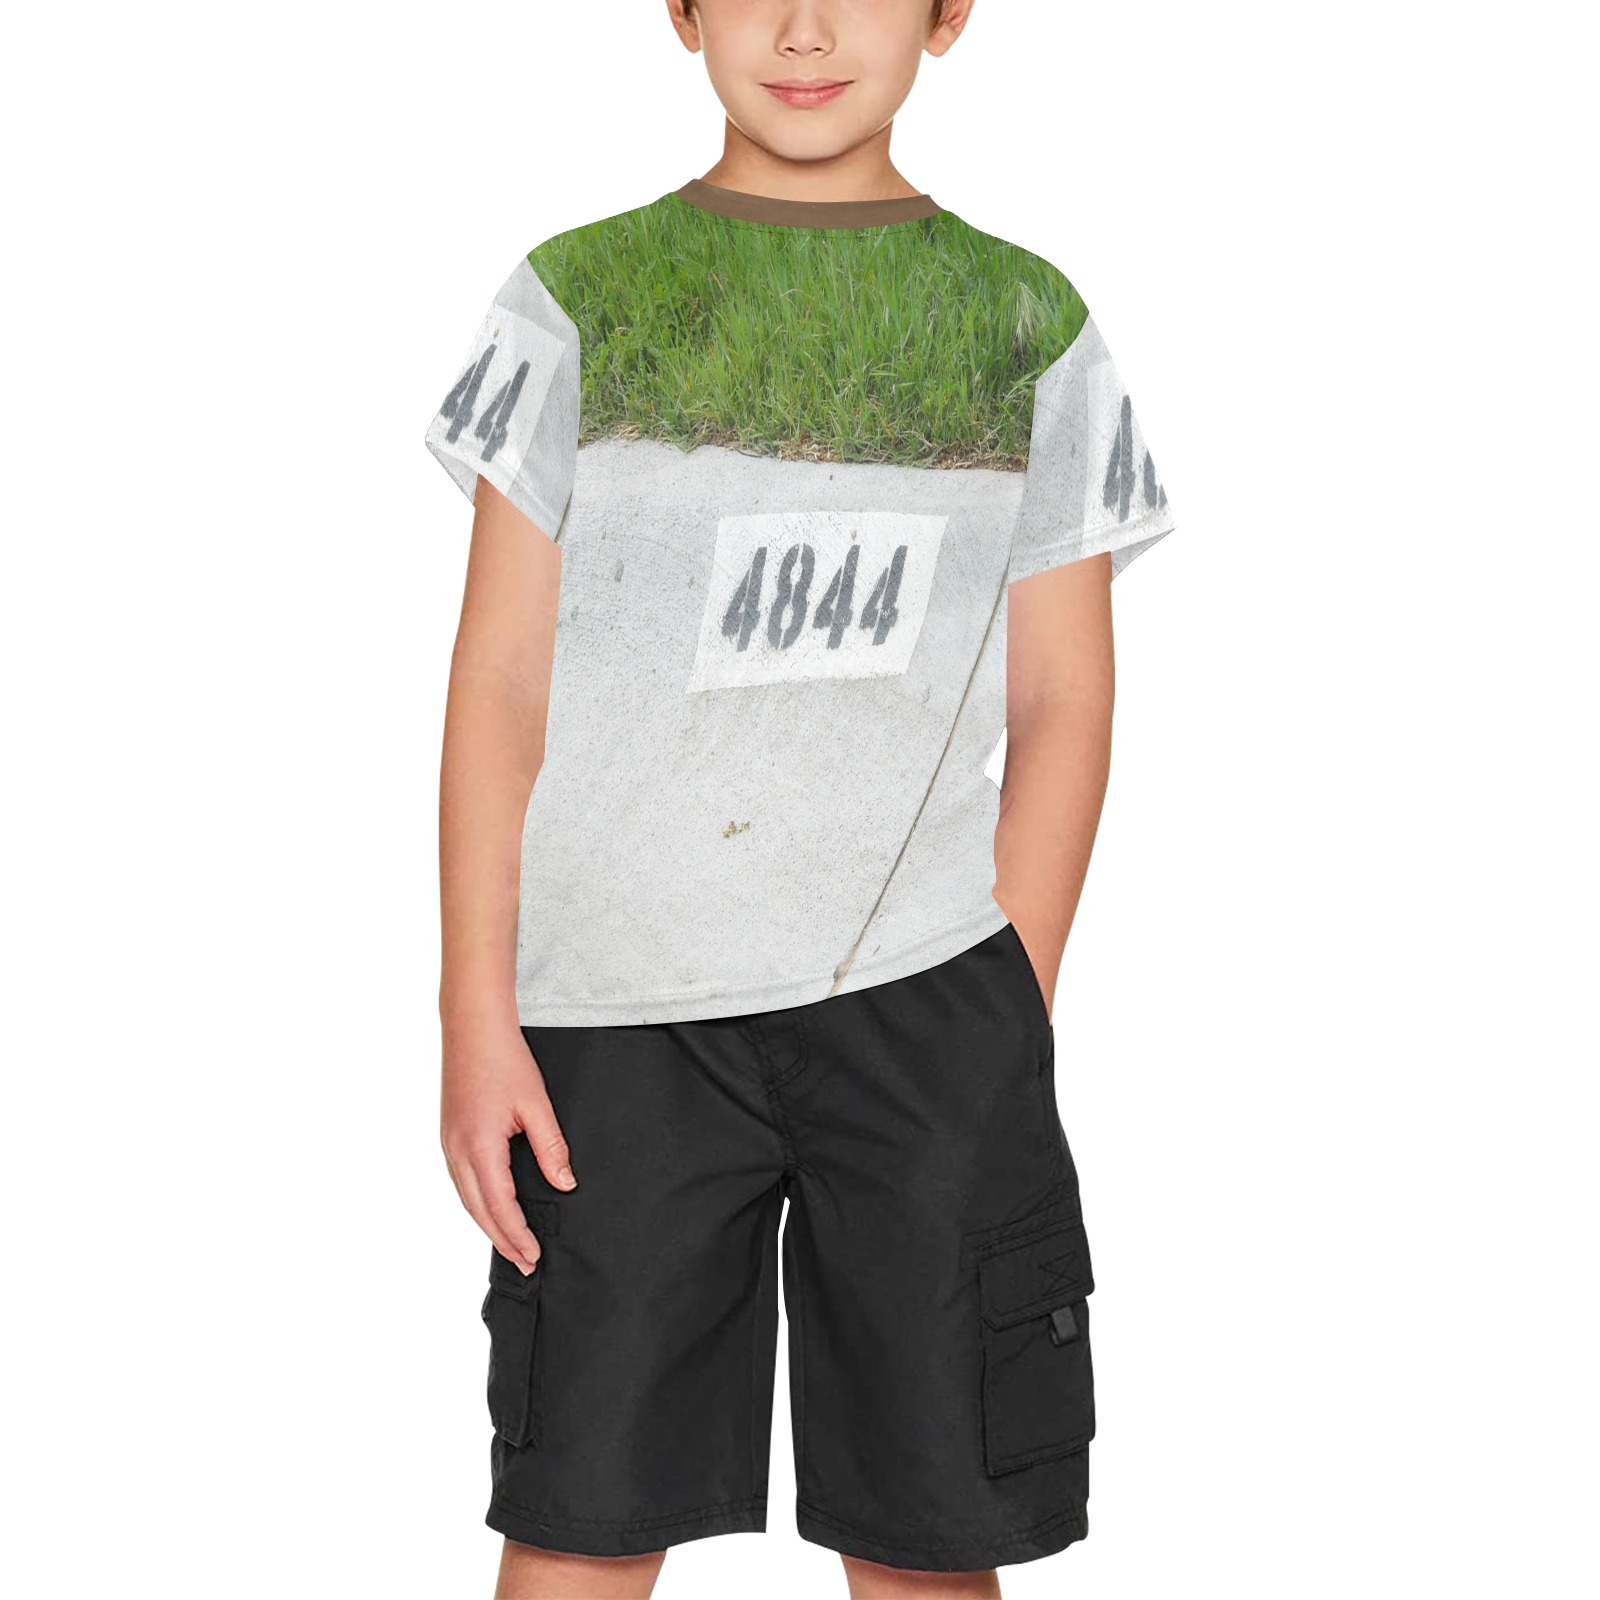 Street Number 4844 with brown collar Big Boys' All Over Print Crew Neck T-Shirt (Model T40-2)